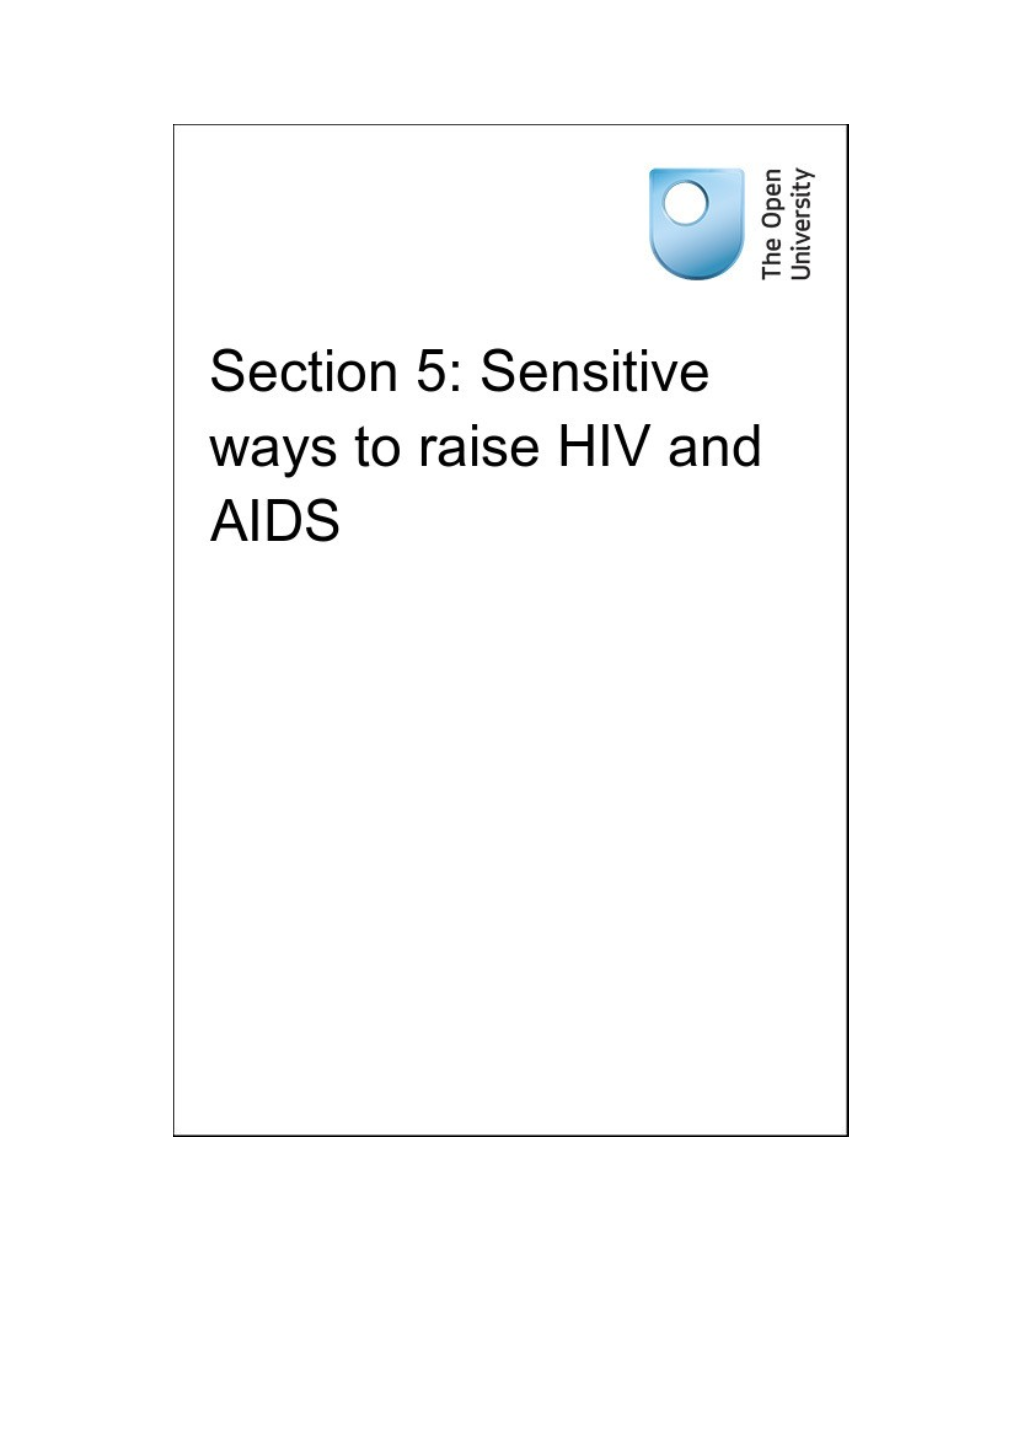 Section 5: Sensitive Ways to Raise HIV and AIDS